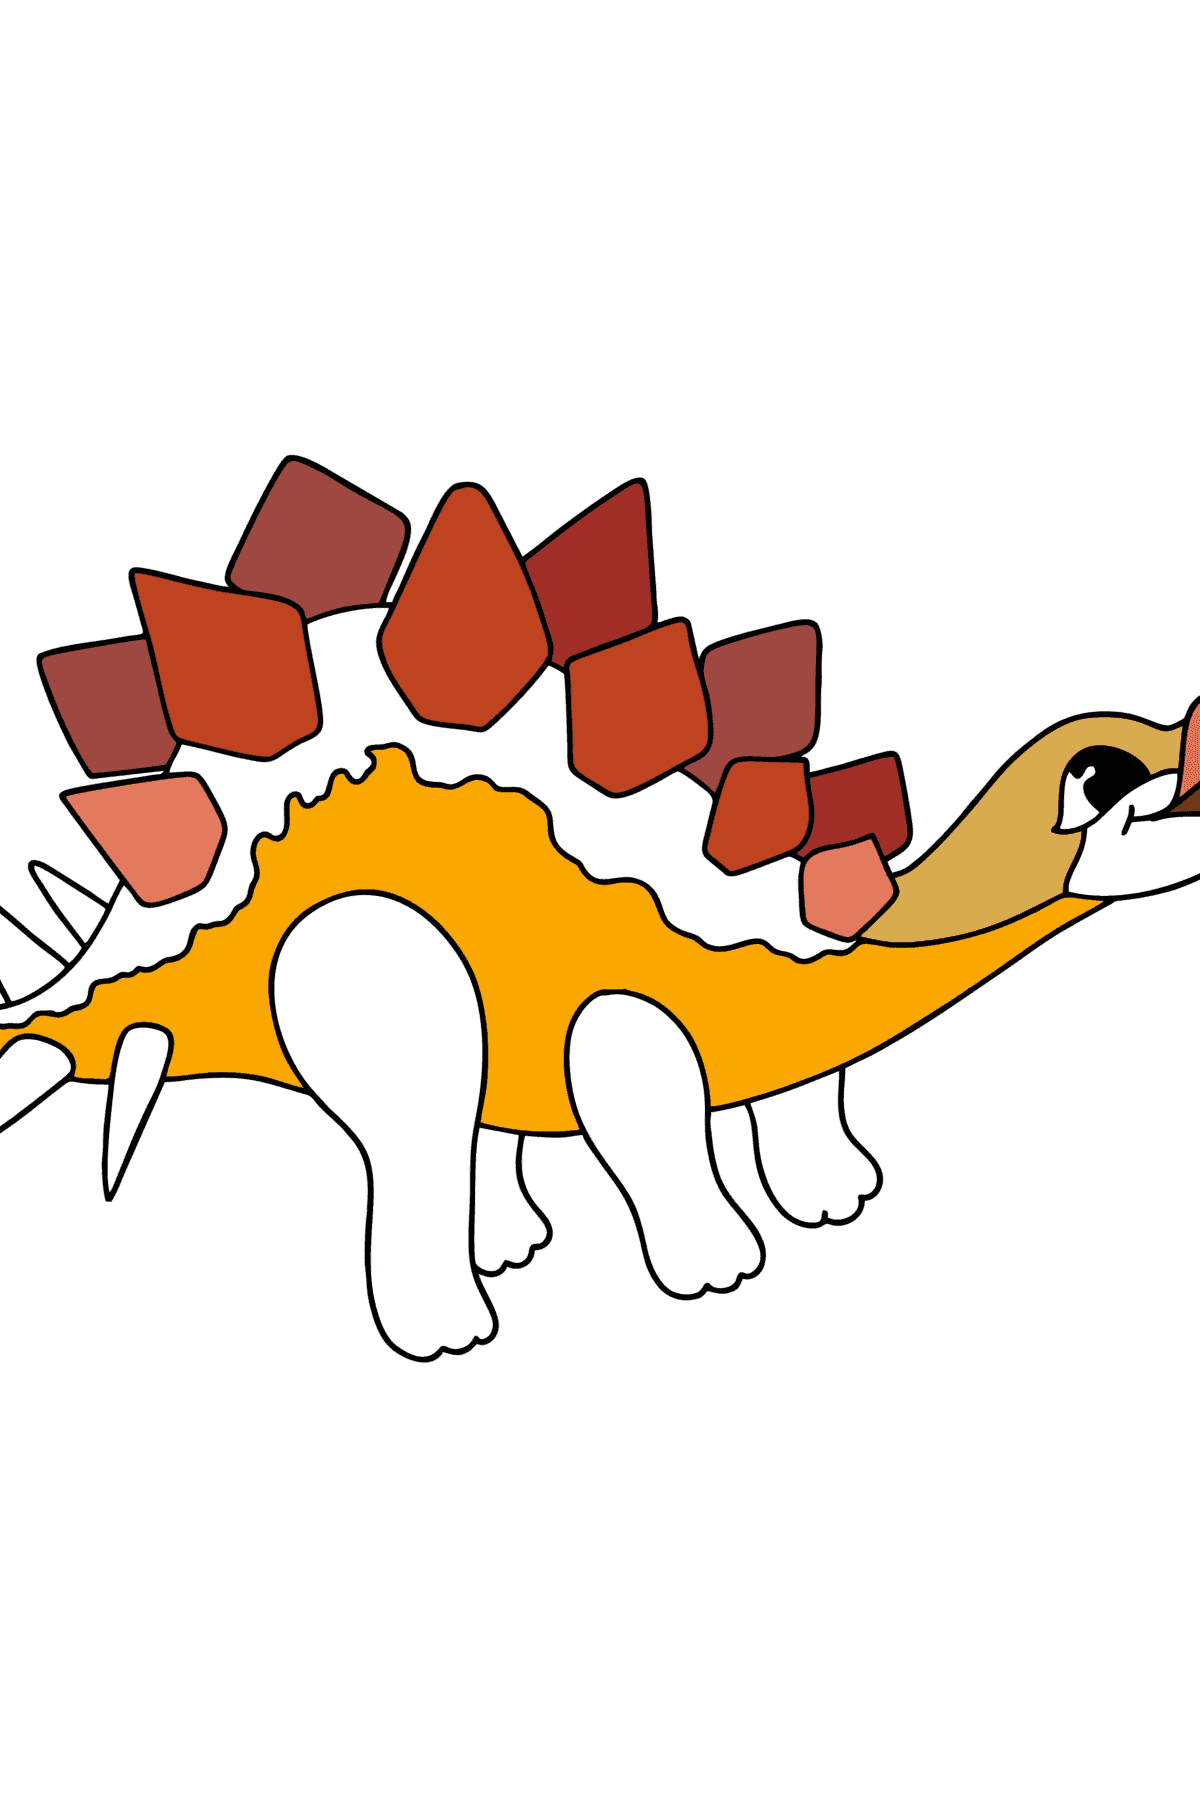 Stegosaurus coloring page - Coloring Pages for Kids